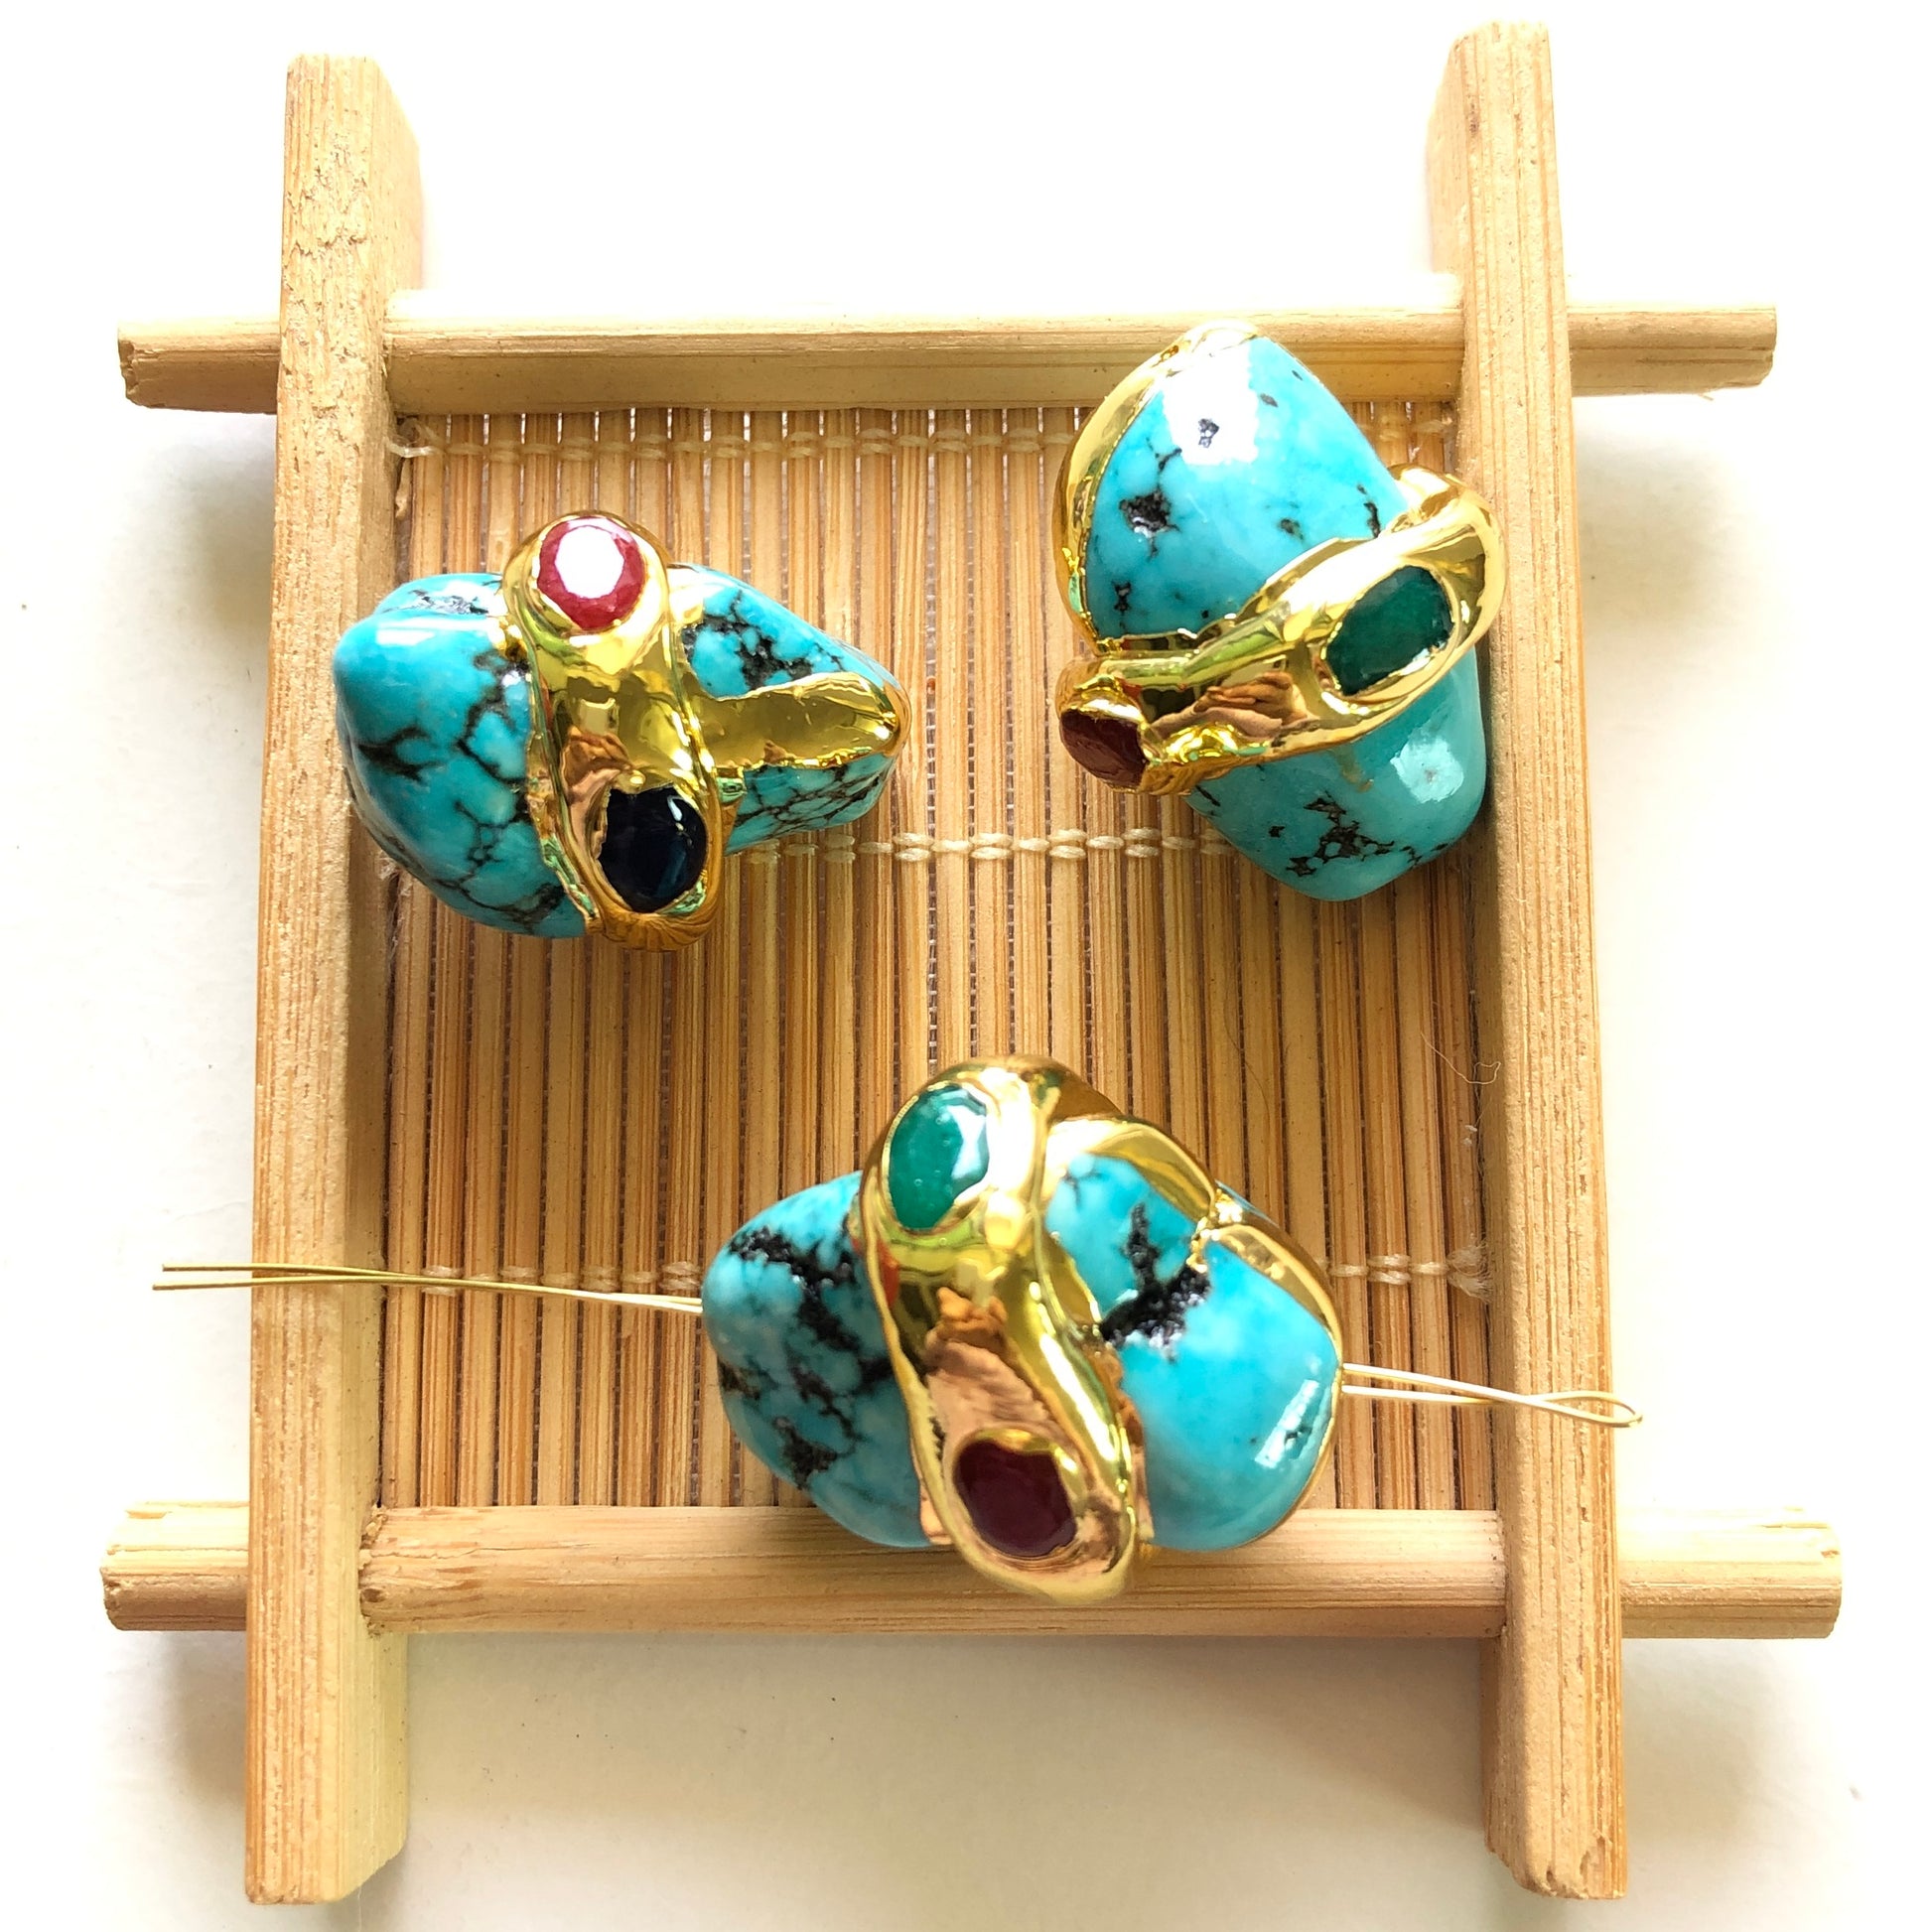 2-5-10pcs/lot 26*23mm Gold Plated Howlite Turquoise Stone Spacers Focal Beads Focal Beads Focal Beads Charms Beads Beyond